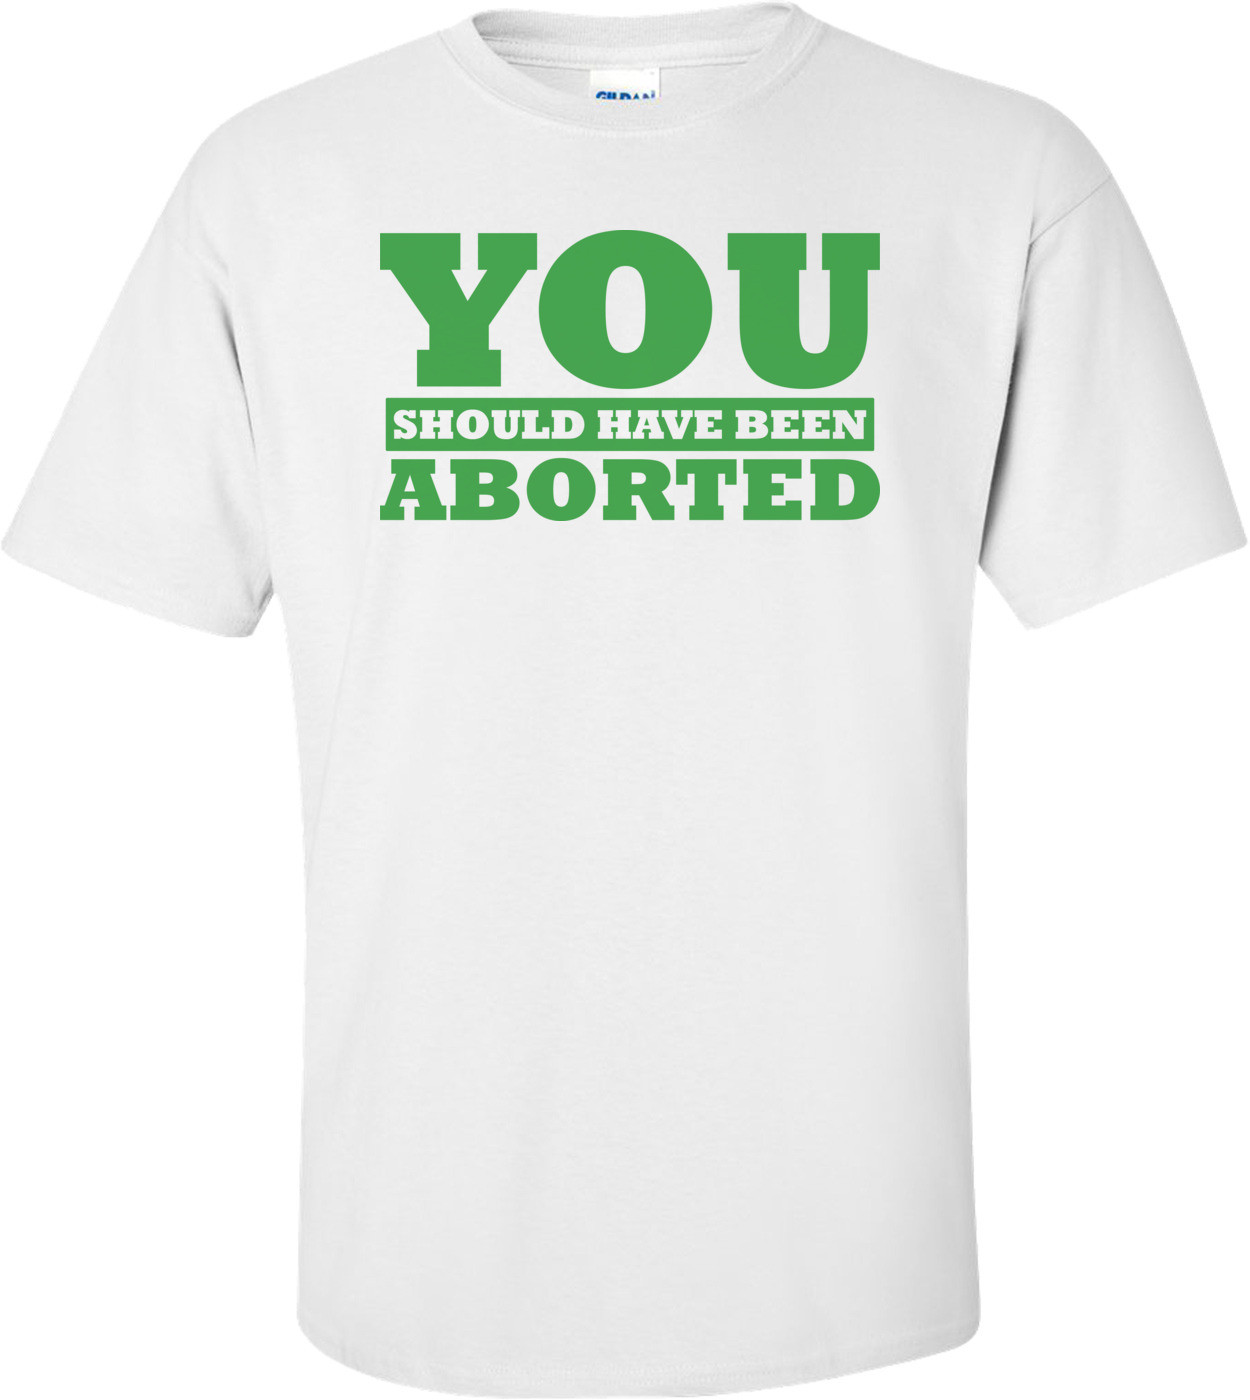 You Should Have Been Aborted Shirt